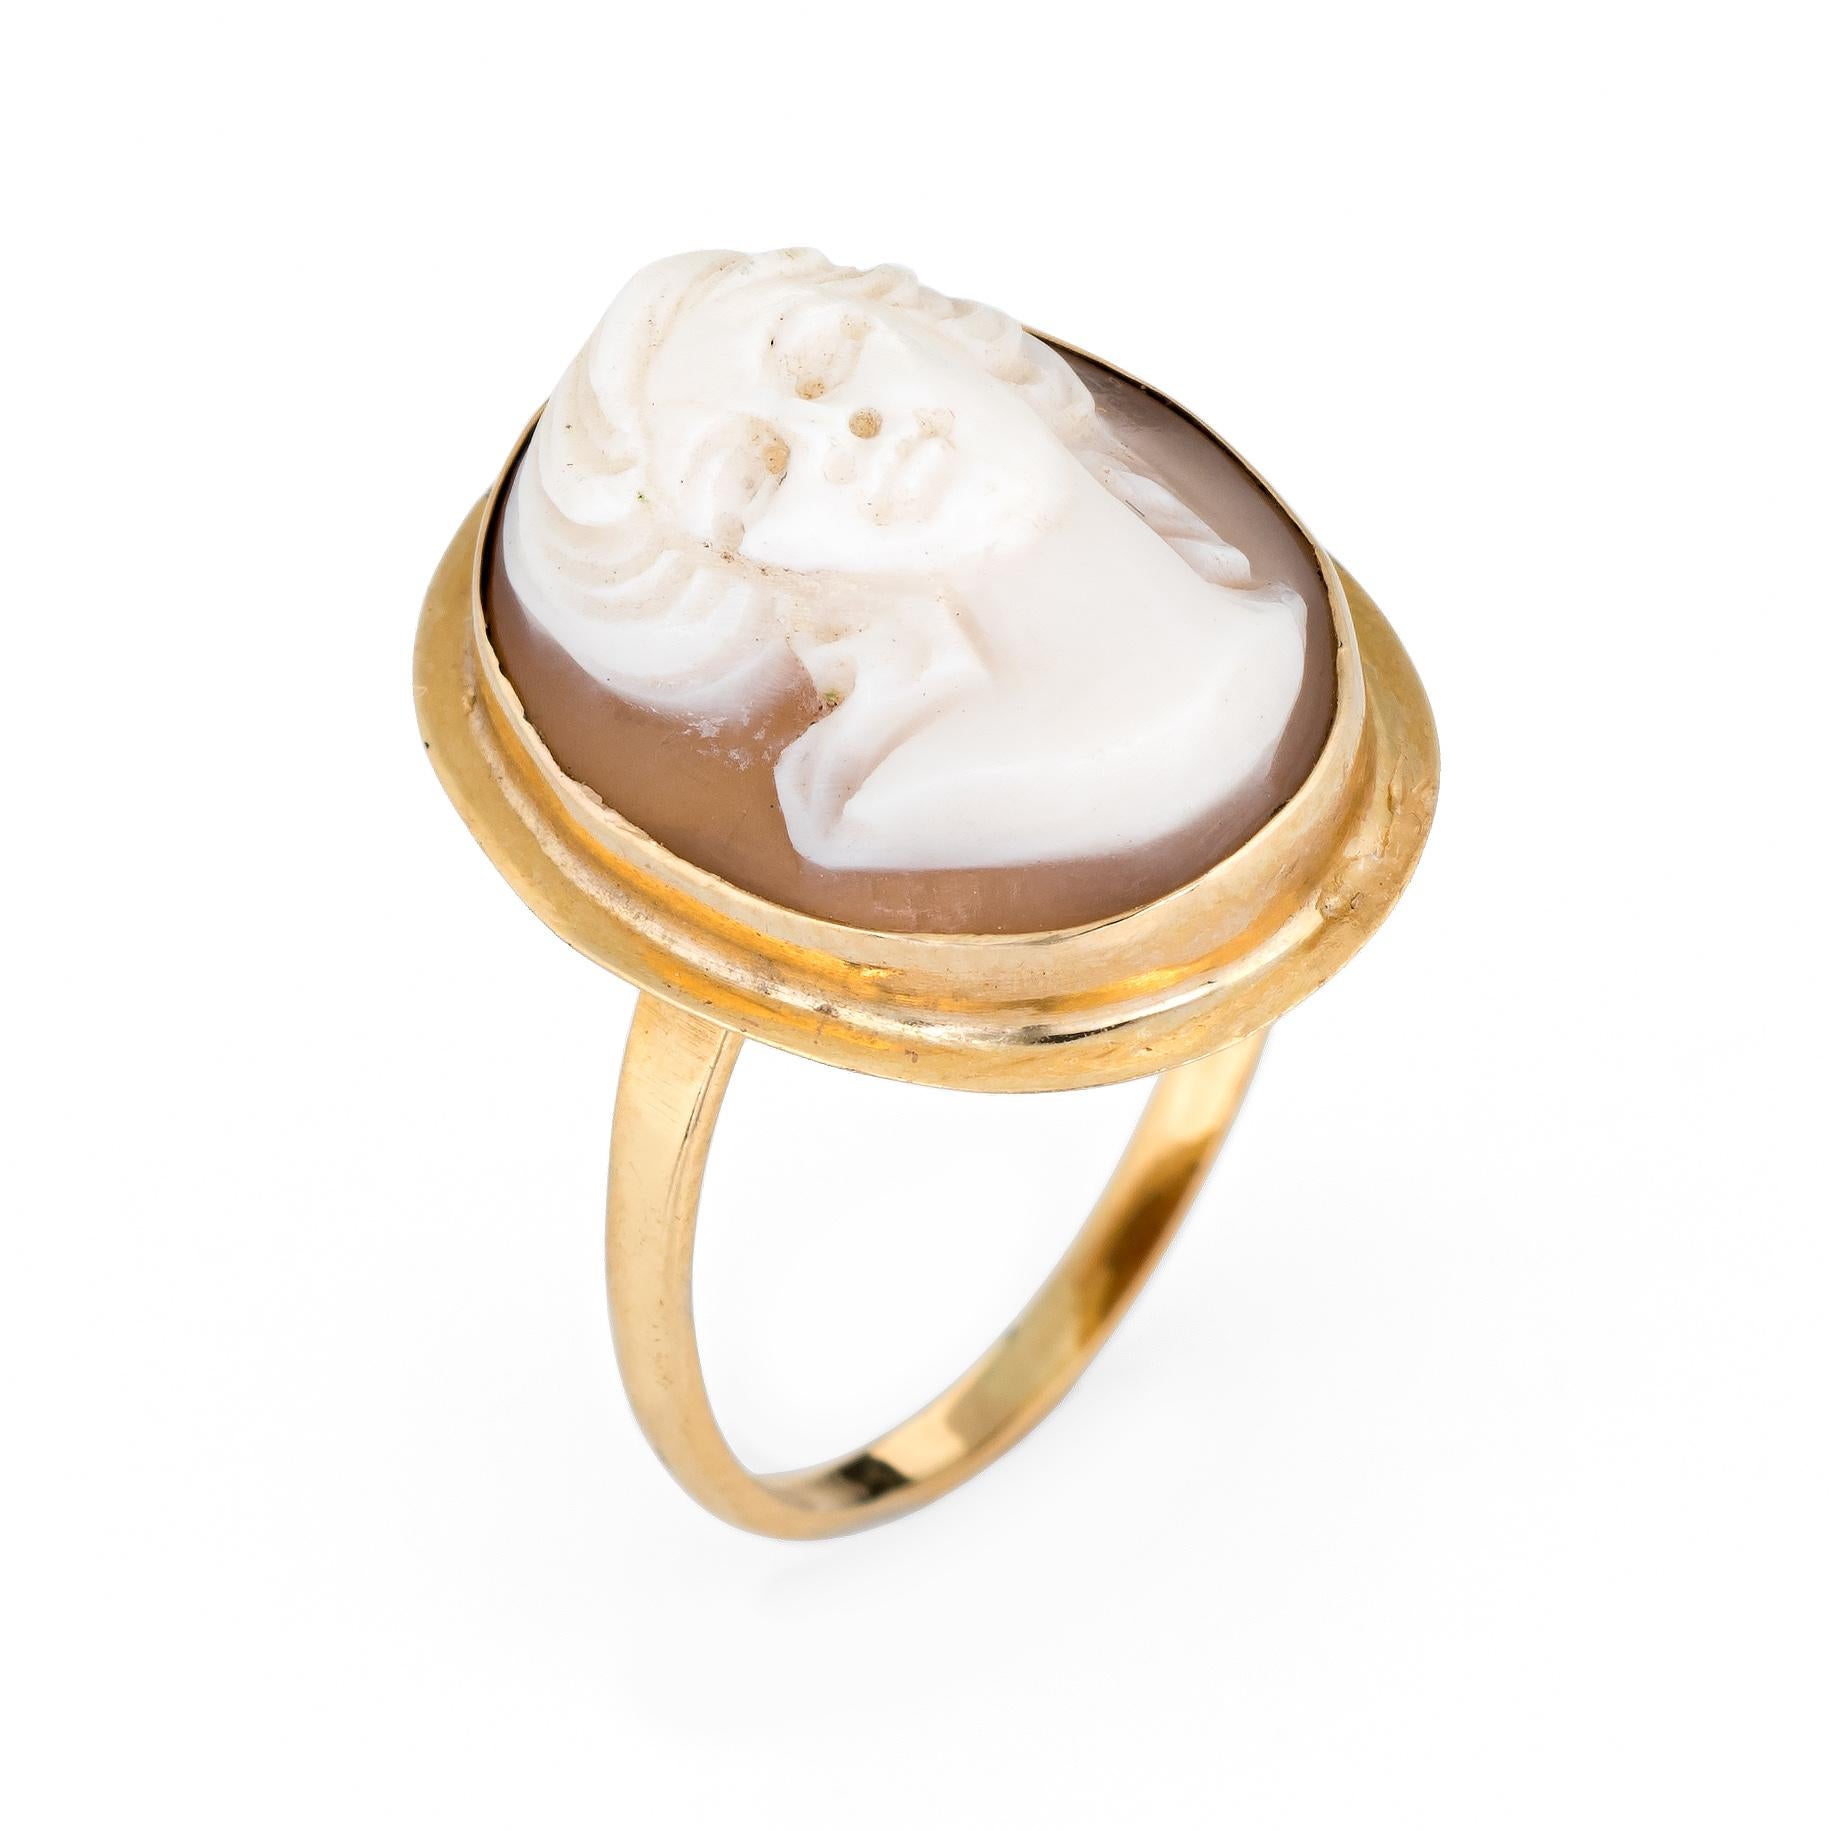 Elegant vintage cameo ring crafted in 18 karat yellow gold. 

Shell cameo is carved in the bust of a woman measuring 15mm x 10mm. The cameo is in excellent condition and free of cracks or chips. 

The cameo features a graceful bust of a woman in